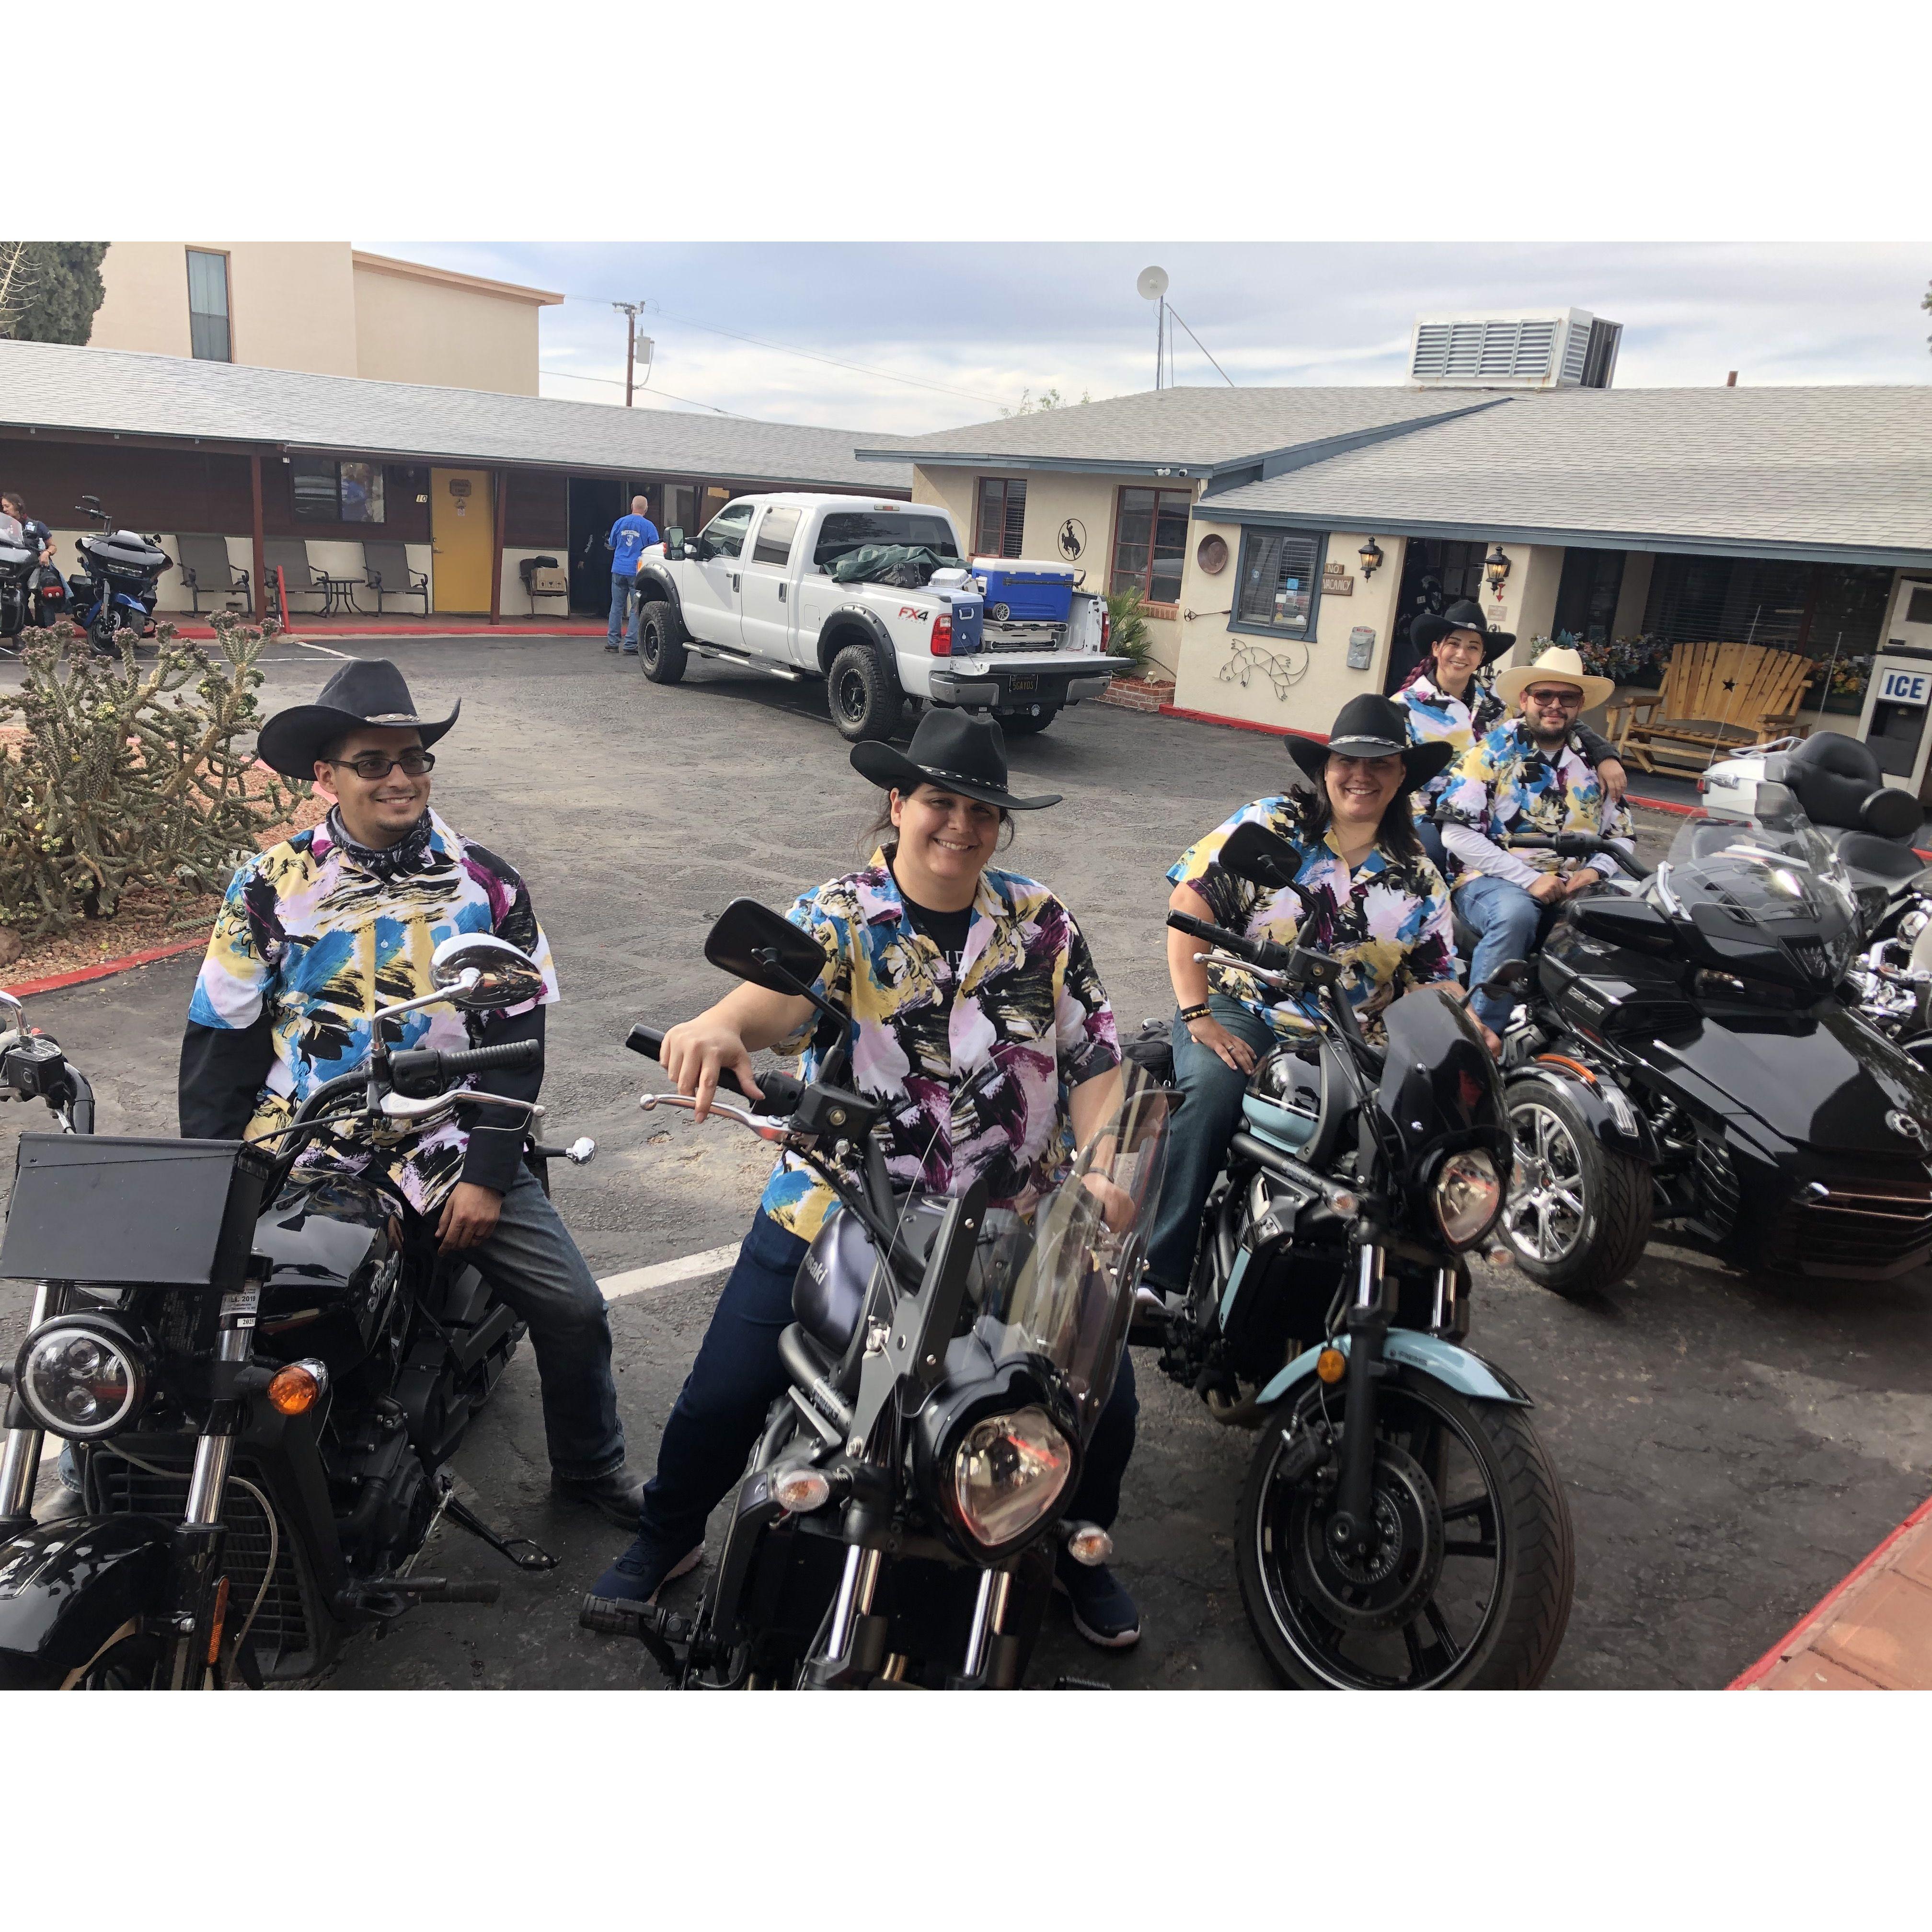 May 2021 - When the 5 of them became officially adopted by the California Blue Knights MC and dubbed the Hawaiian 5-0